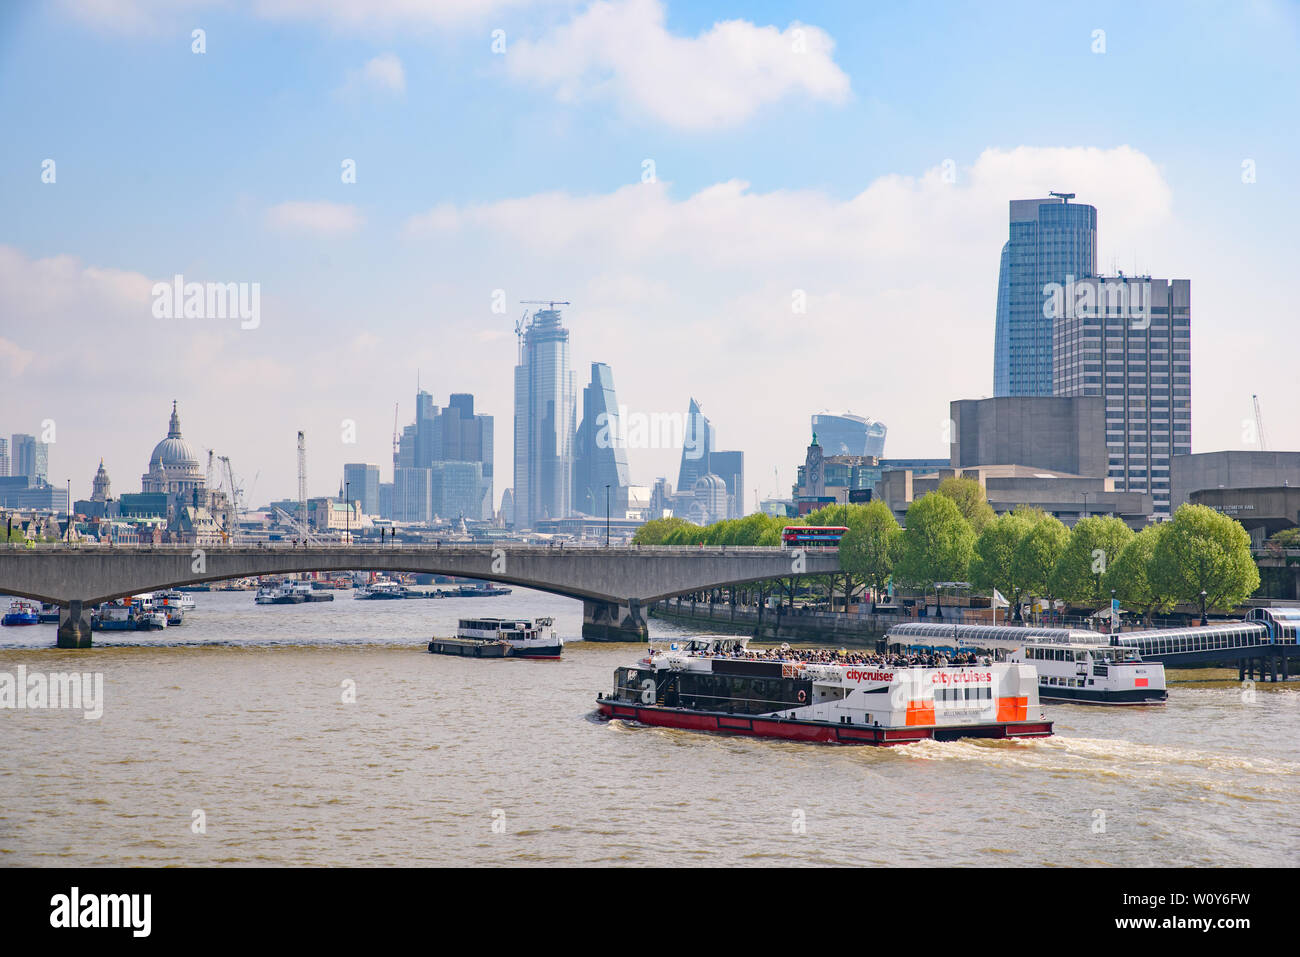 Boats on the River Thames in London, United Kingdom Stock Photo